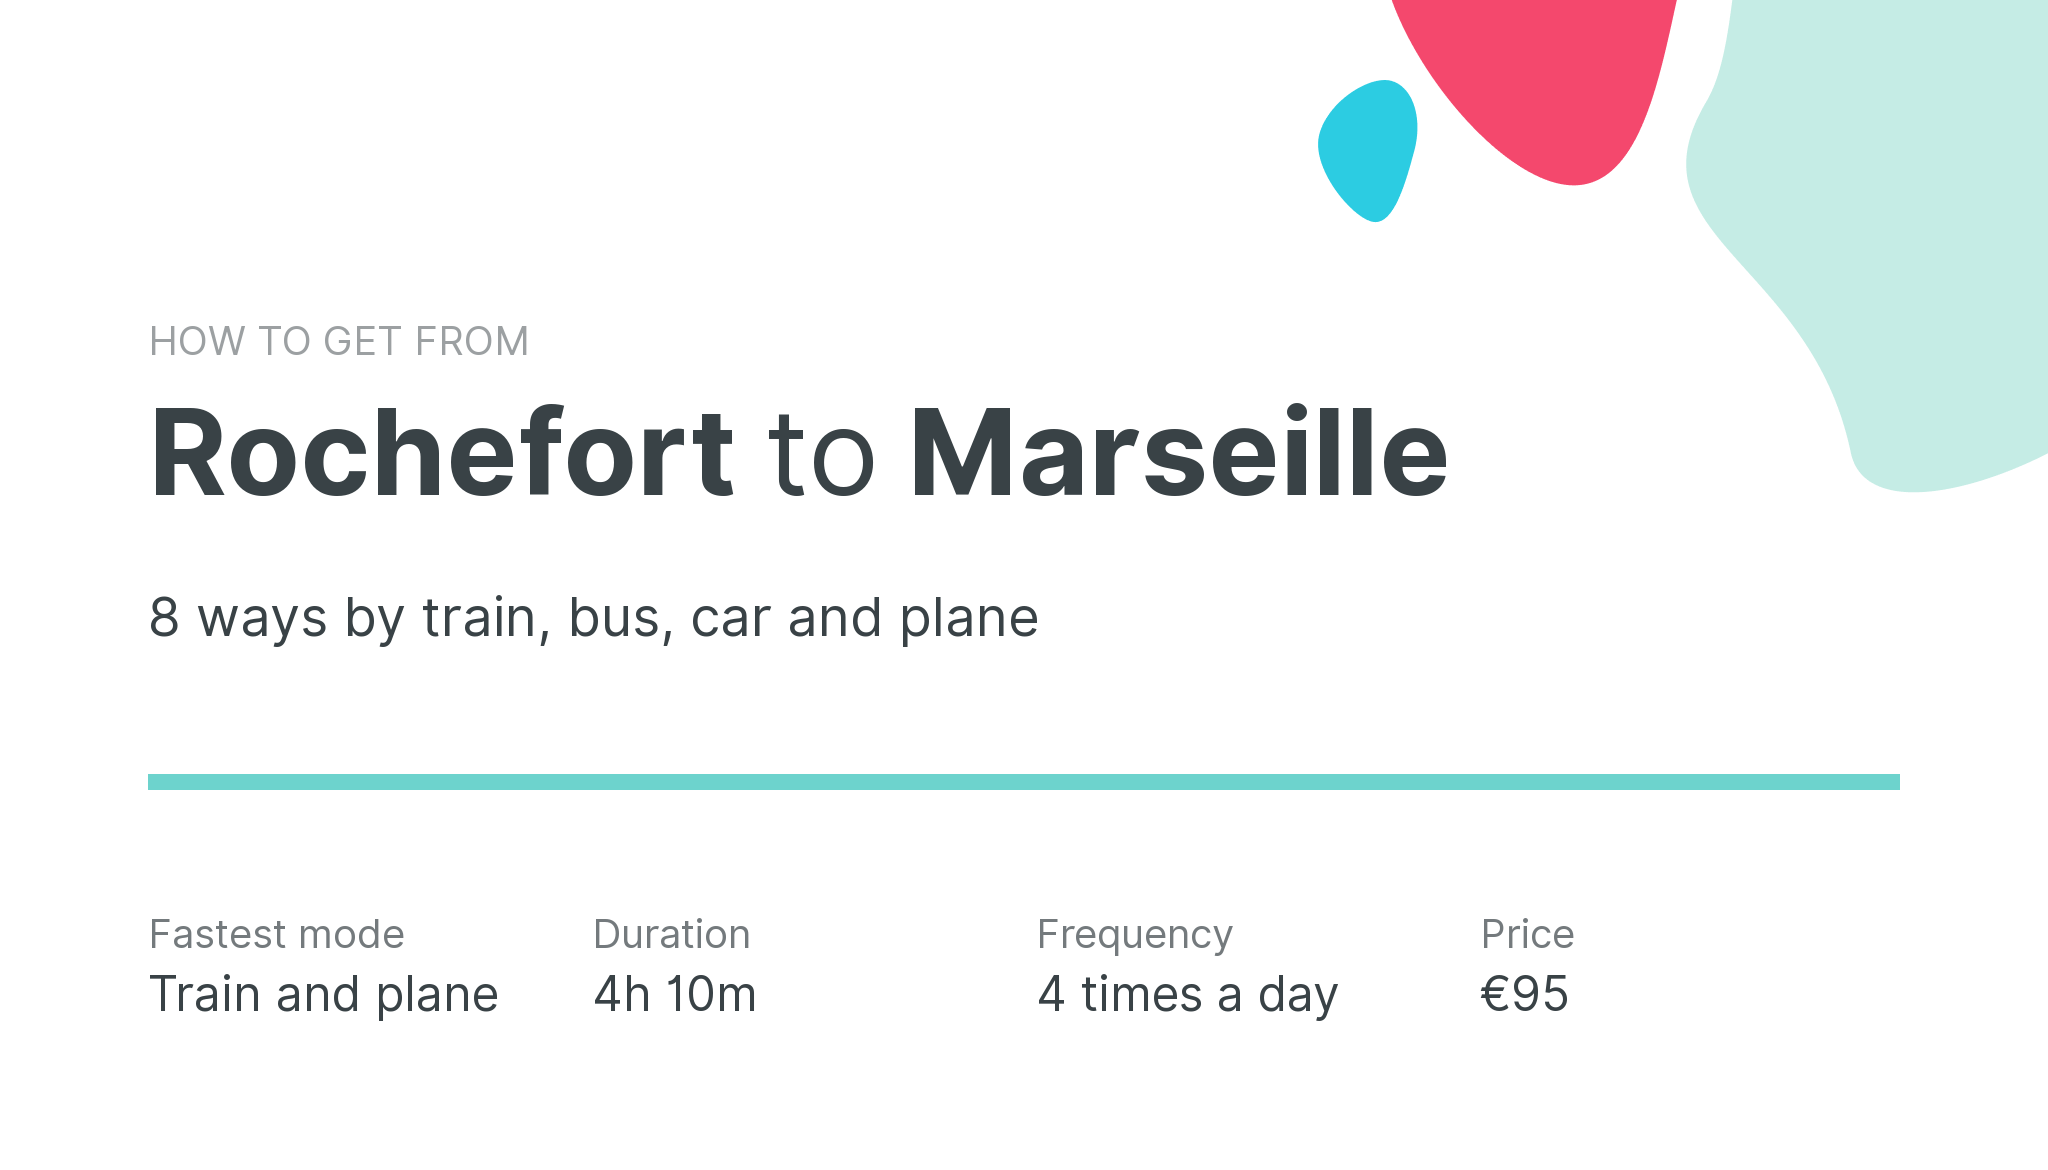 How do I get from Rochefort to Marseille